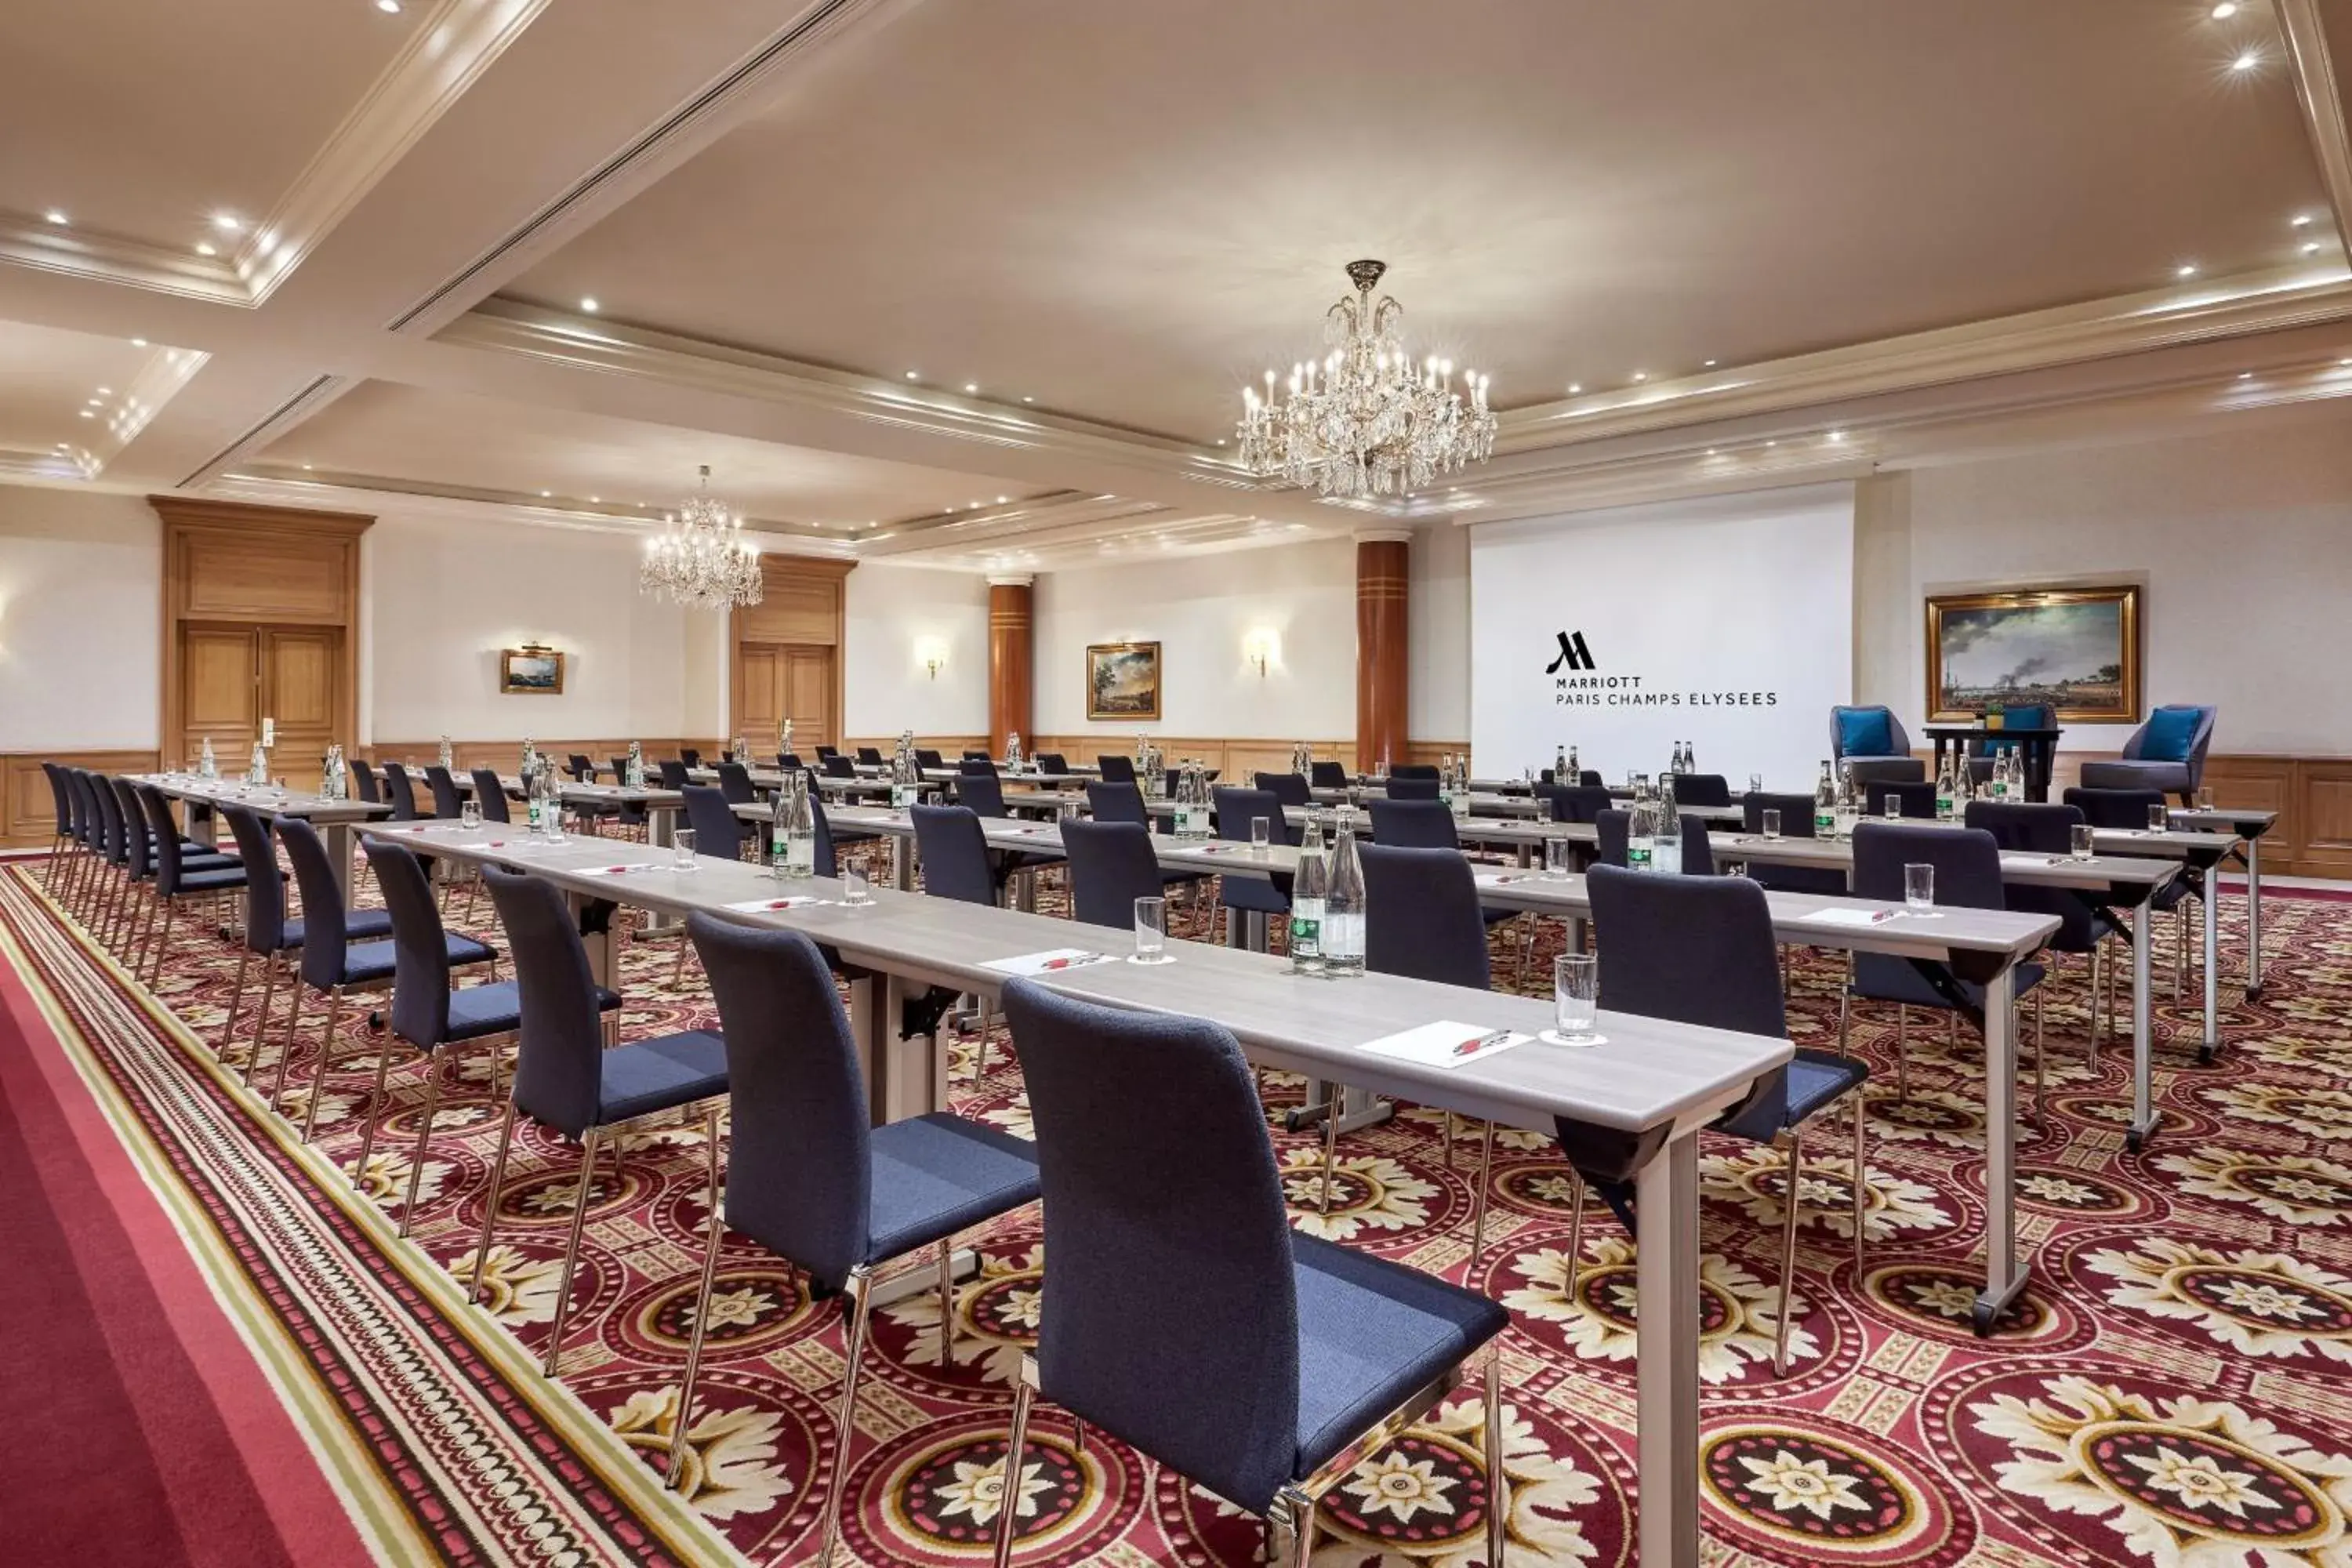 Meeting/conference room in Paris Marriott Champs Elysees Hotel